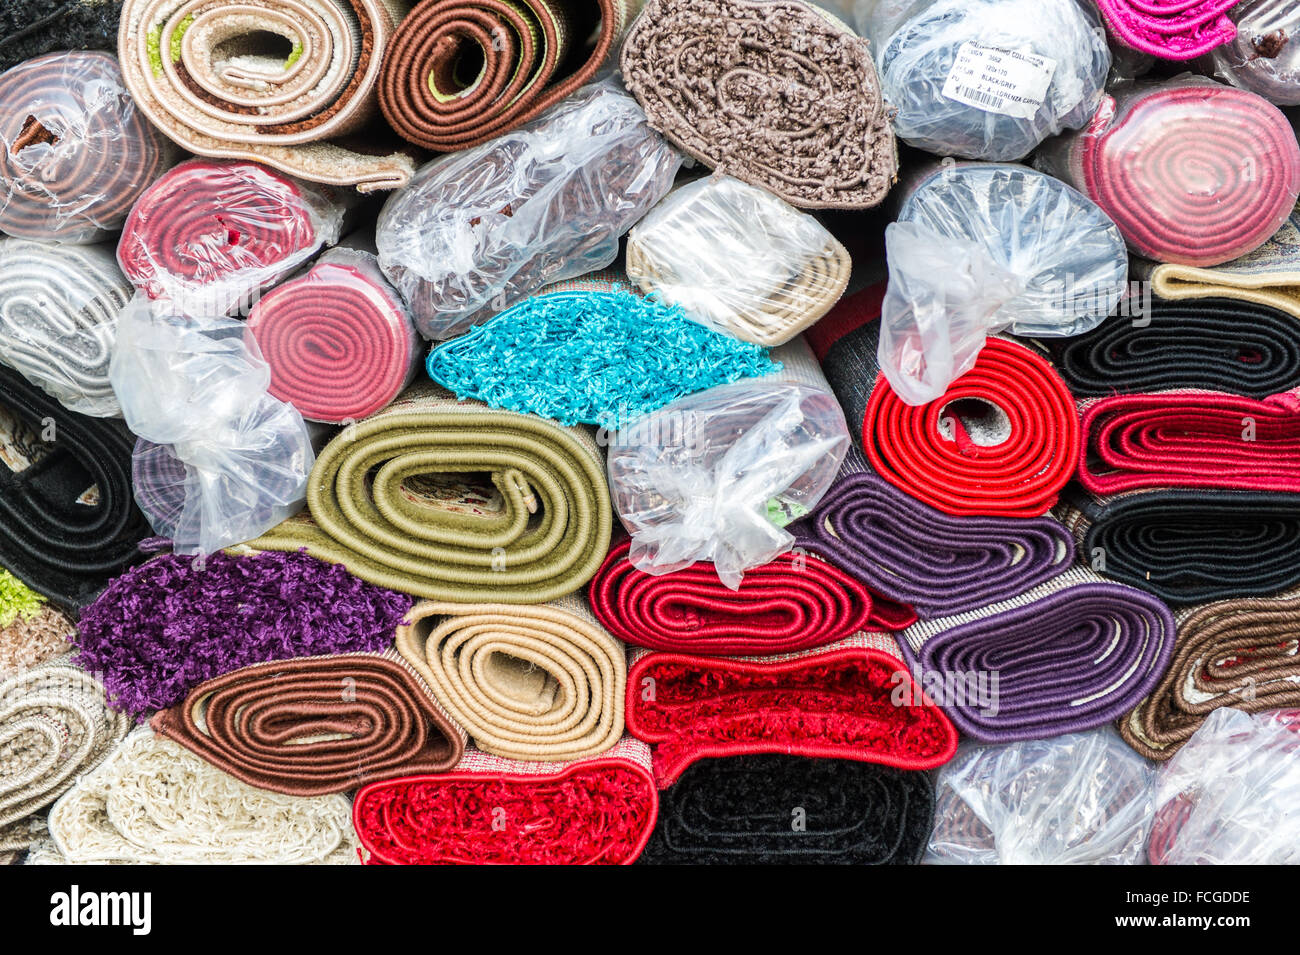 A pile of rolled up rugs ready for sale at Bantry Friday Market, West Cork, Ireland. Stock Photo